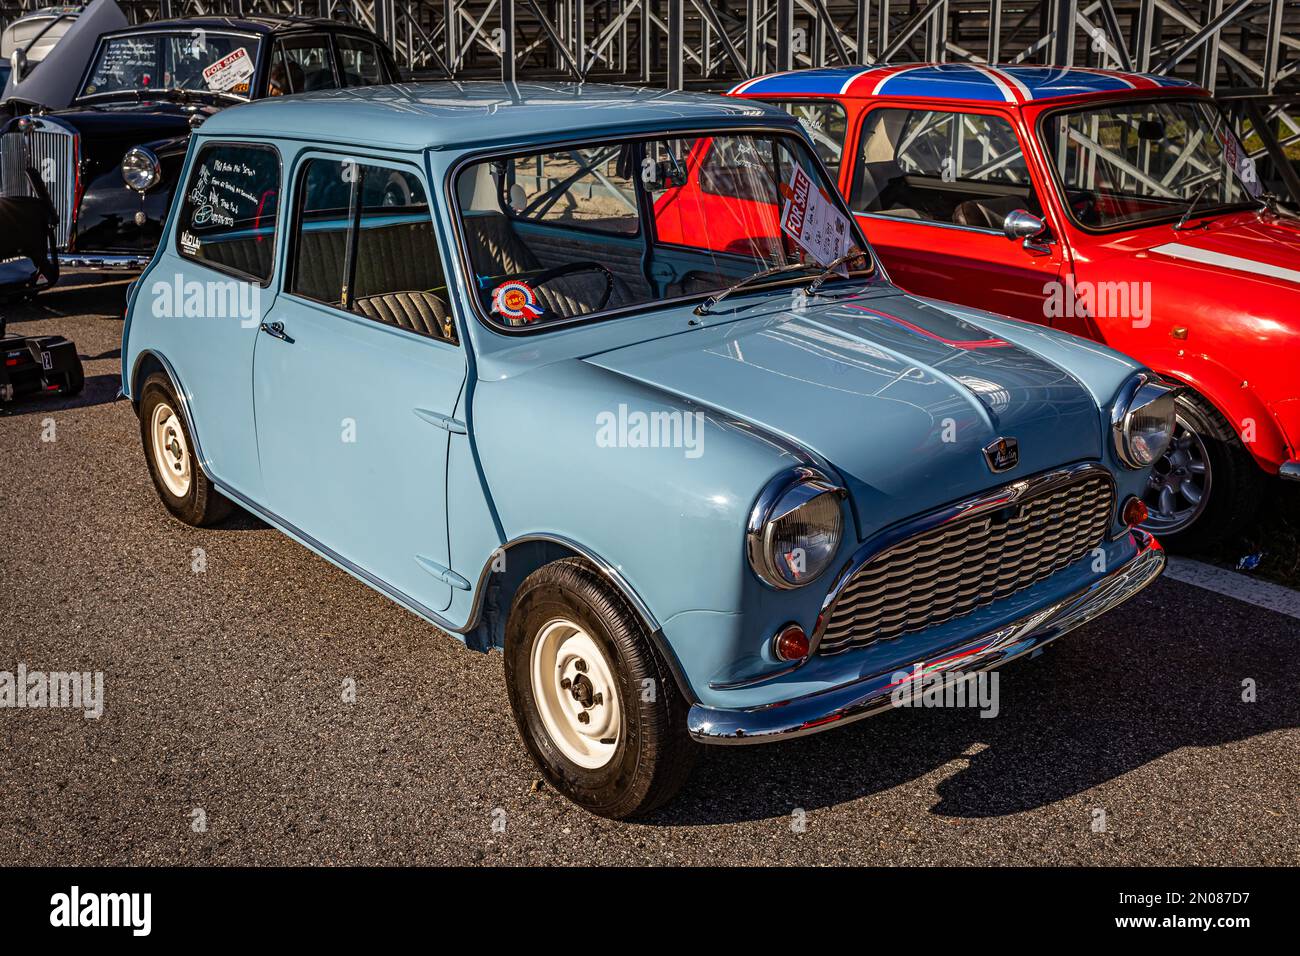 Daytona Beach, FL - November 26, 2022: High perspective front corner view of a 1960 Austin Mini Seven Super Deluxe Coupe at a local car show. Stock Photo